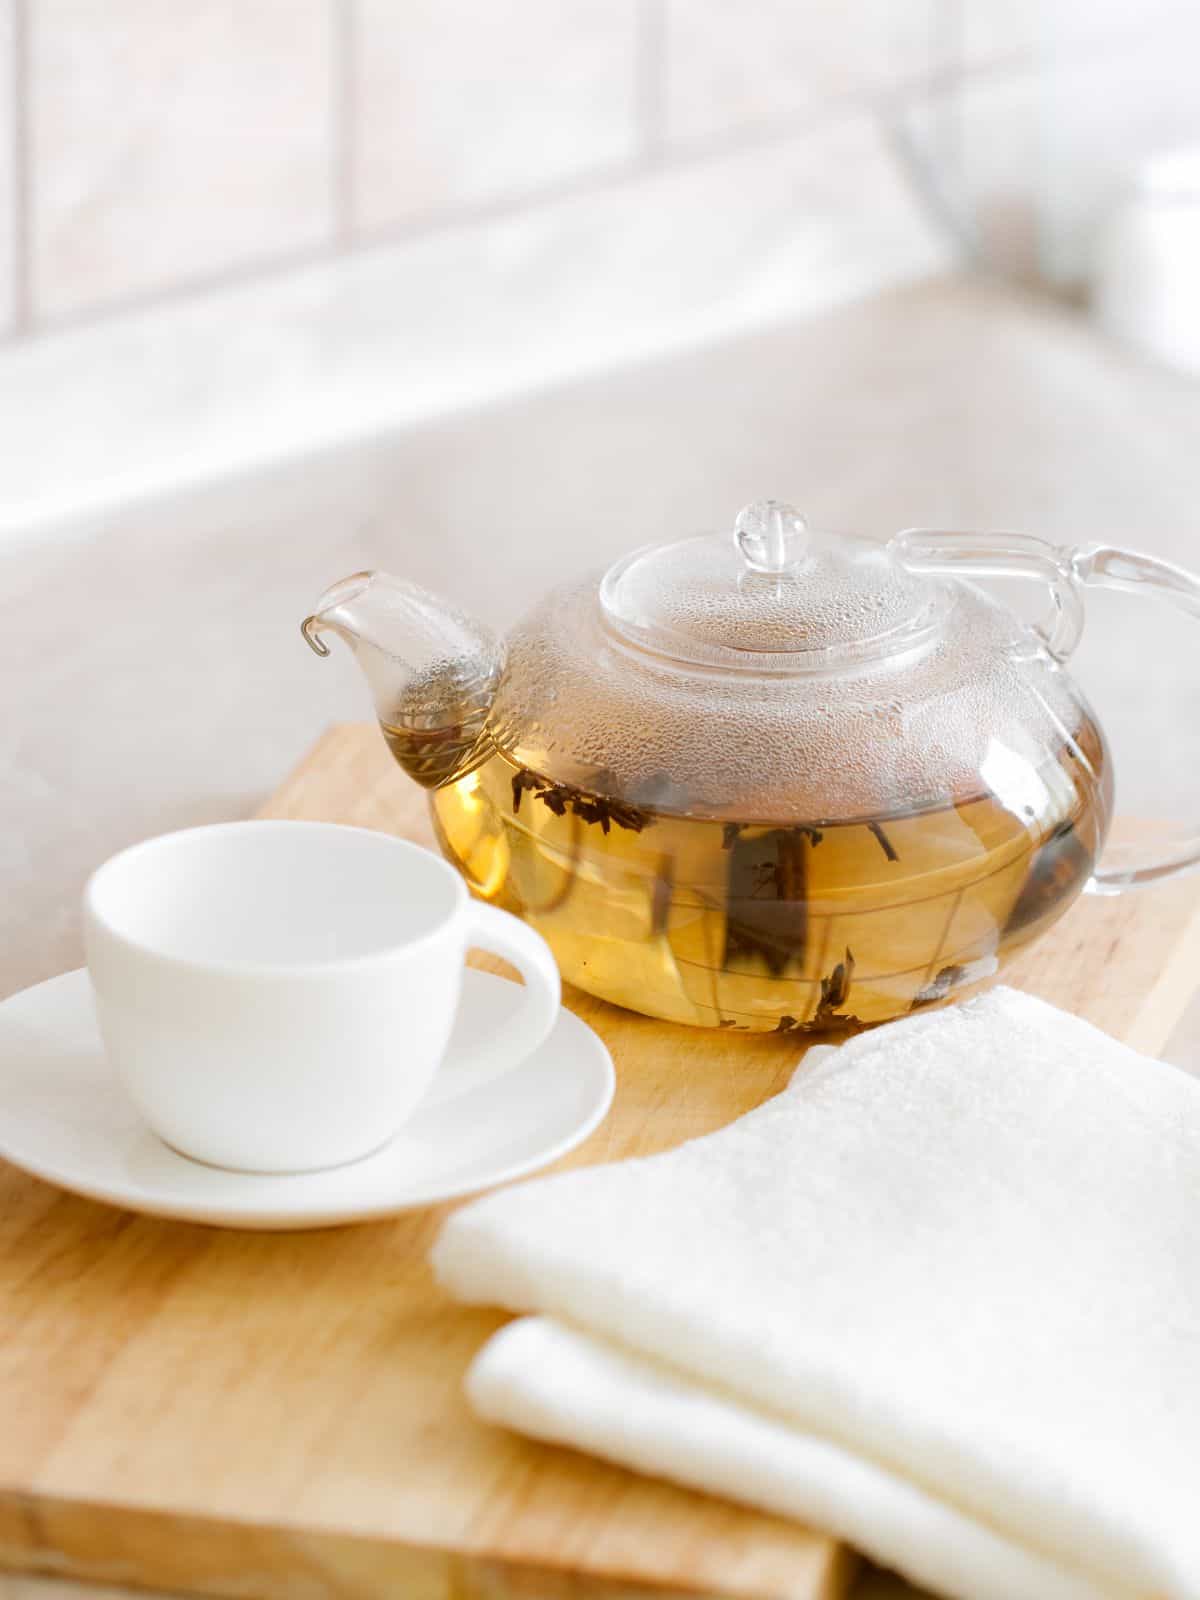 A clear glass tea kettle with light colored tea in it next to a white teacup on a light wood cutting board and napkin